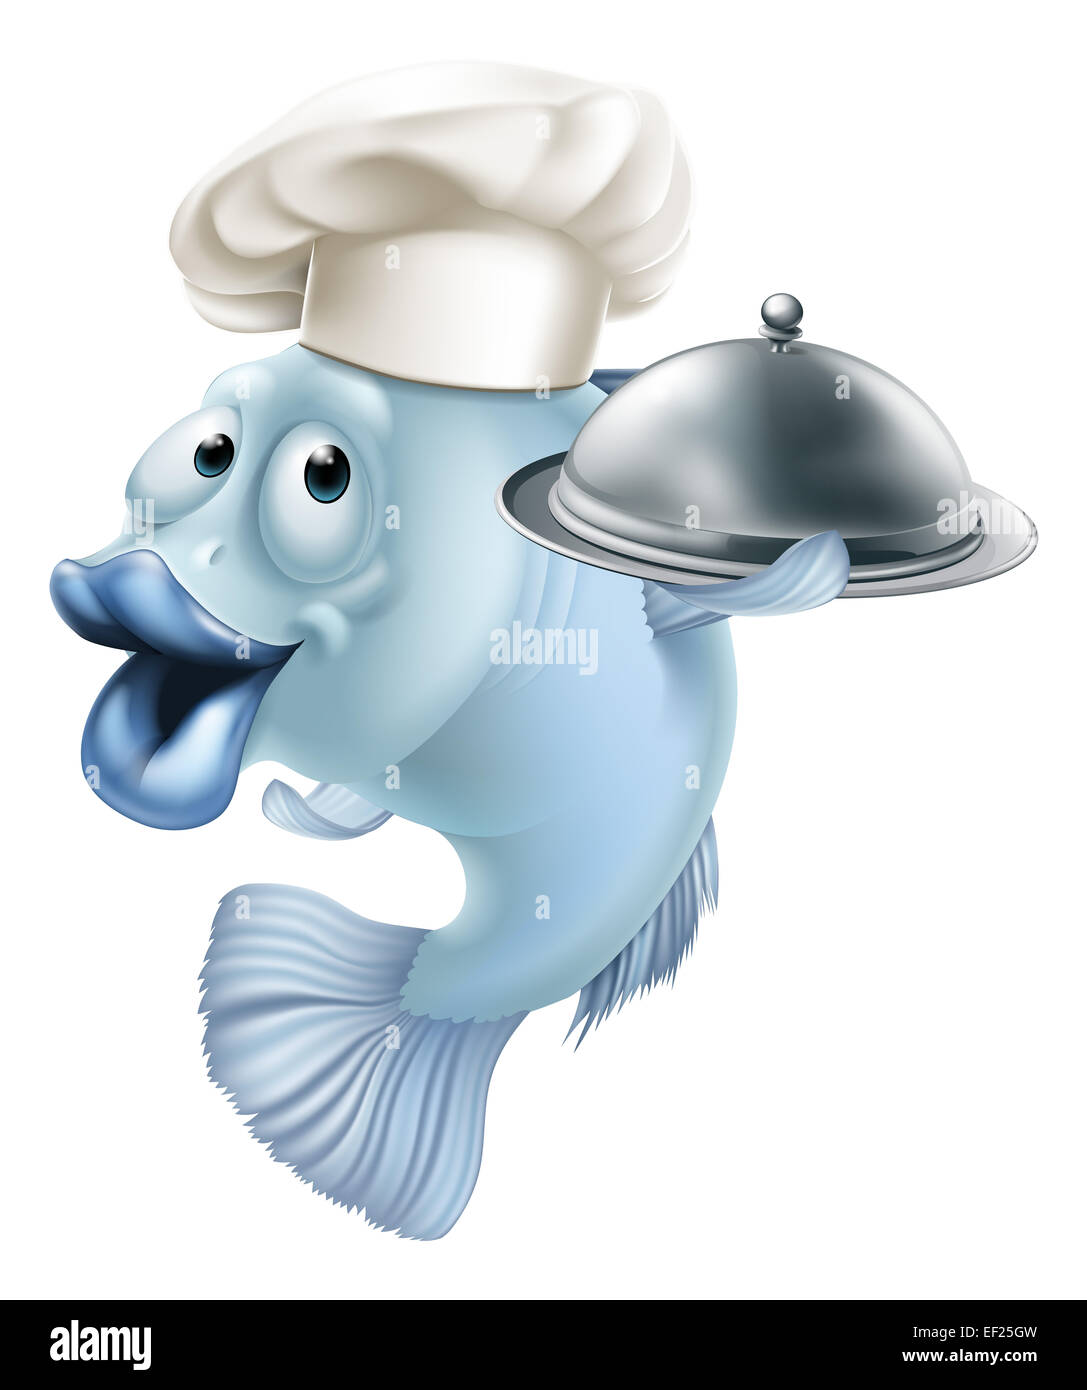 An illustration of a blue cartoon chef fish character holding a tray or platter cloche, seafood mascot concept Stock Photo